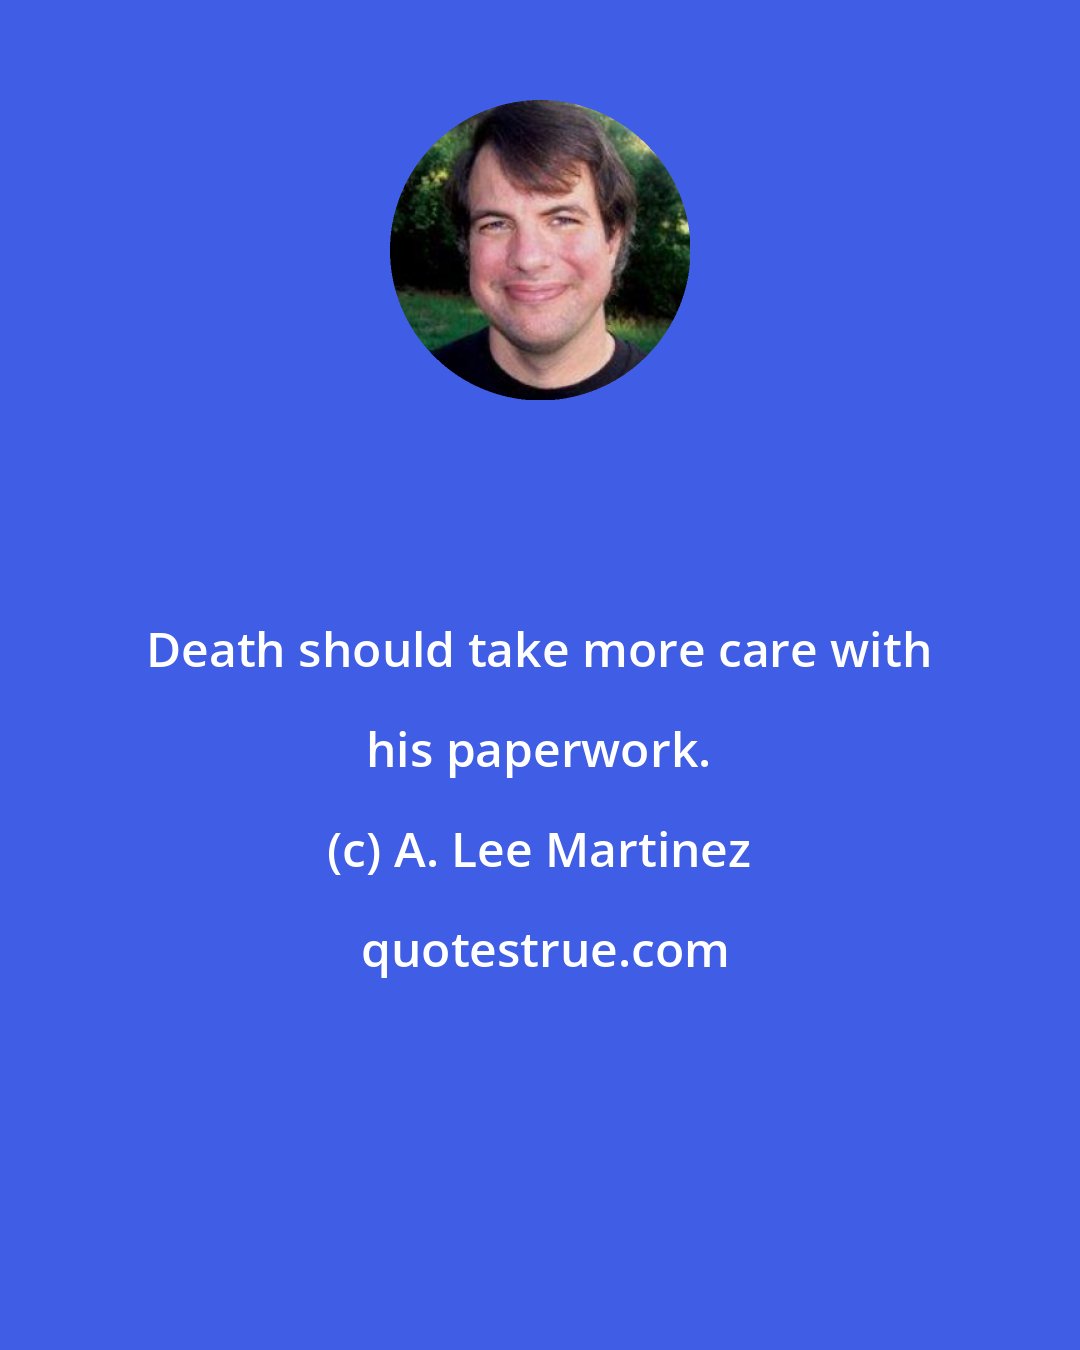 A. Lee Martinez: Death should take more care with his paperwork.